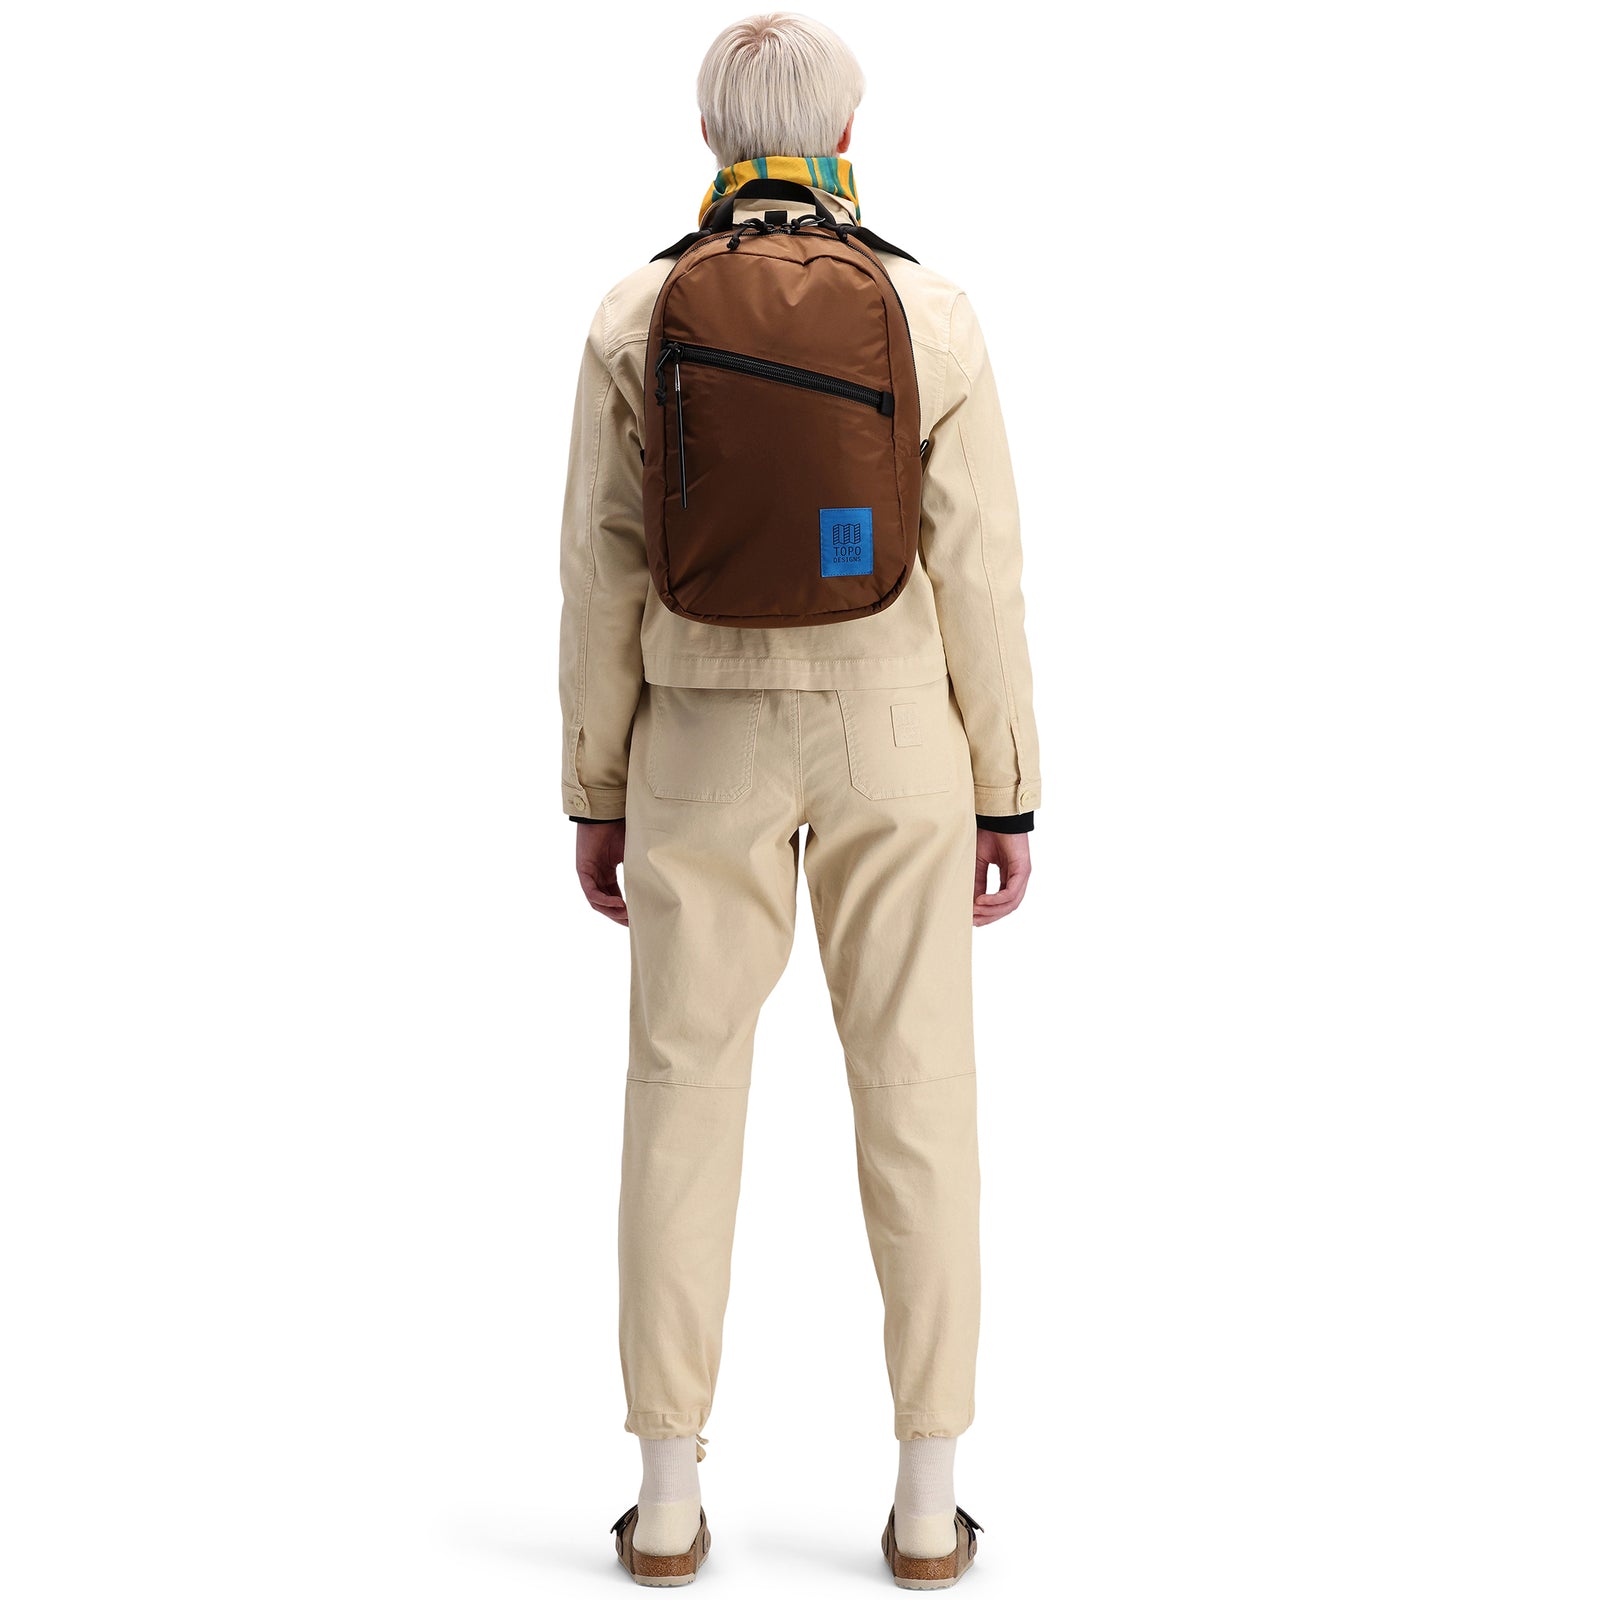 General shot of Topo Designs Light Pack laptop backpack in "cocoa" brown on model shown from back.